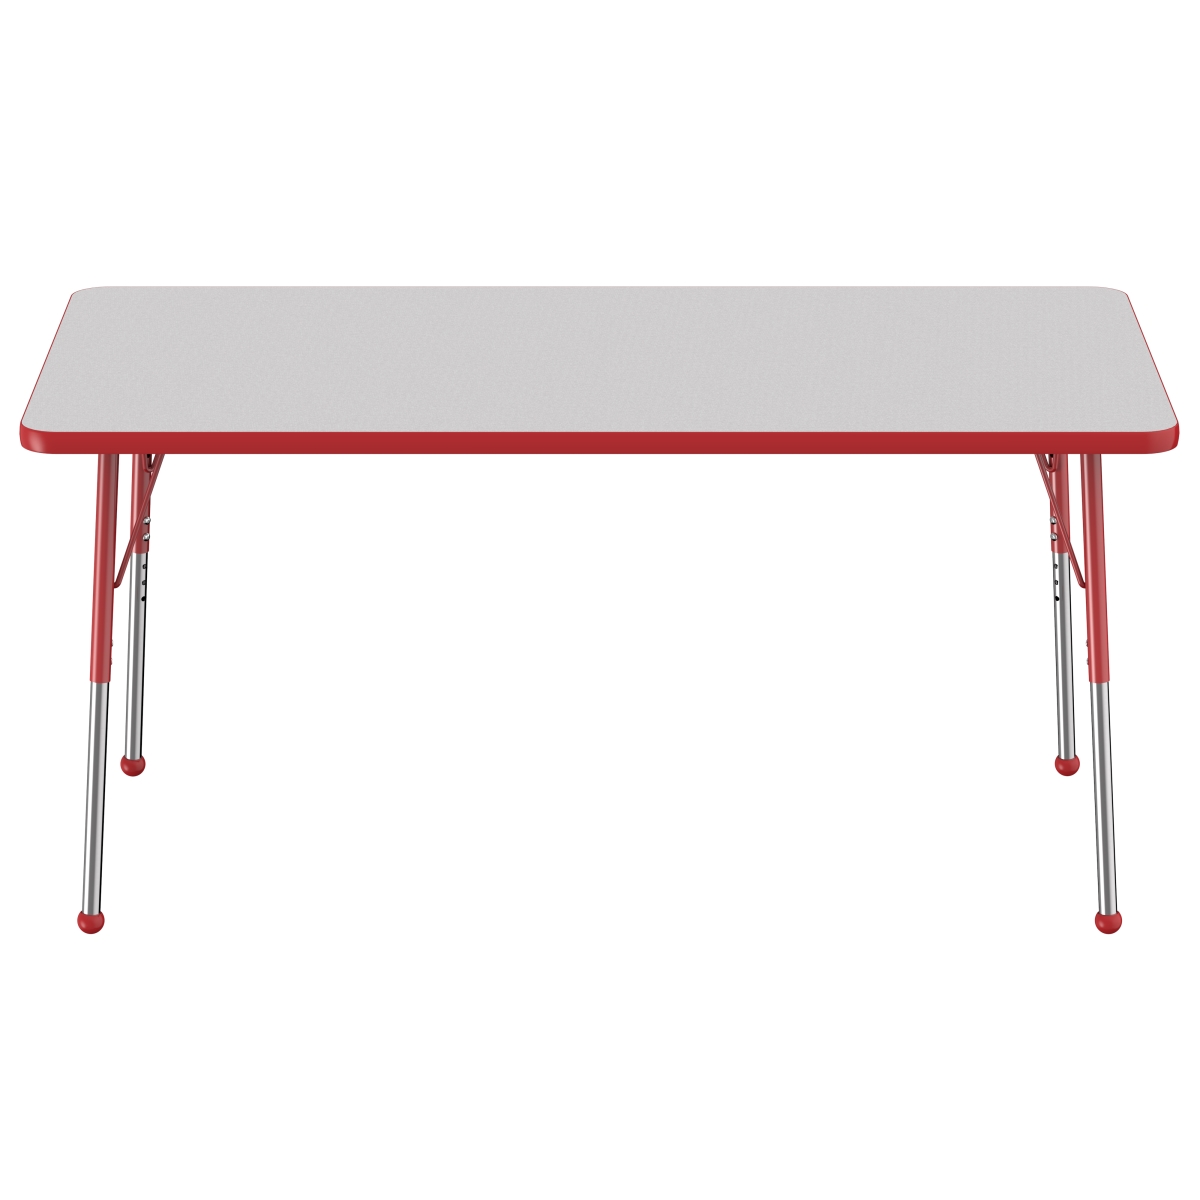 10024-gyrd 30 X 60 In. Rectangle T-mold Adjustable Activity Table With Standard Ball - Grey & Red